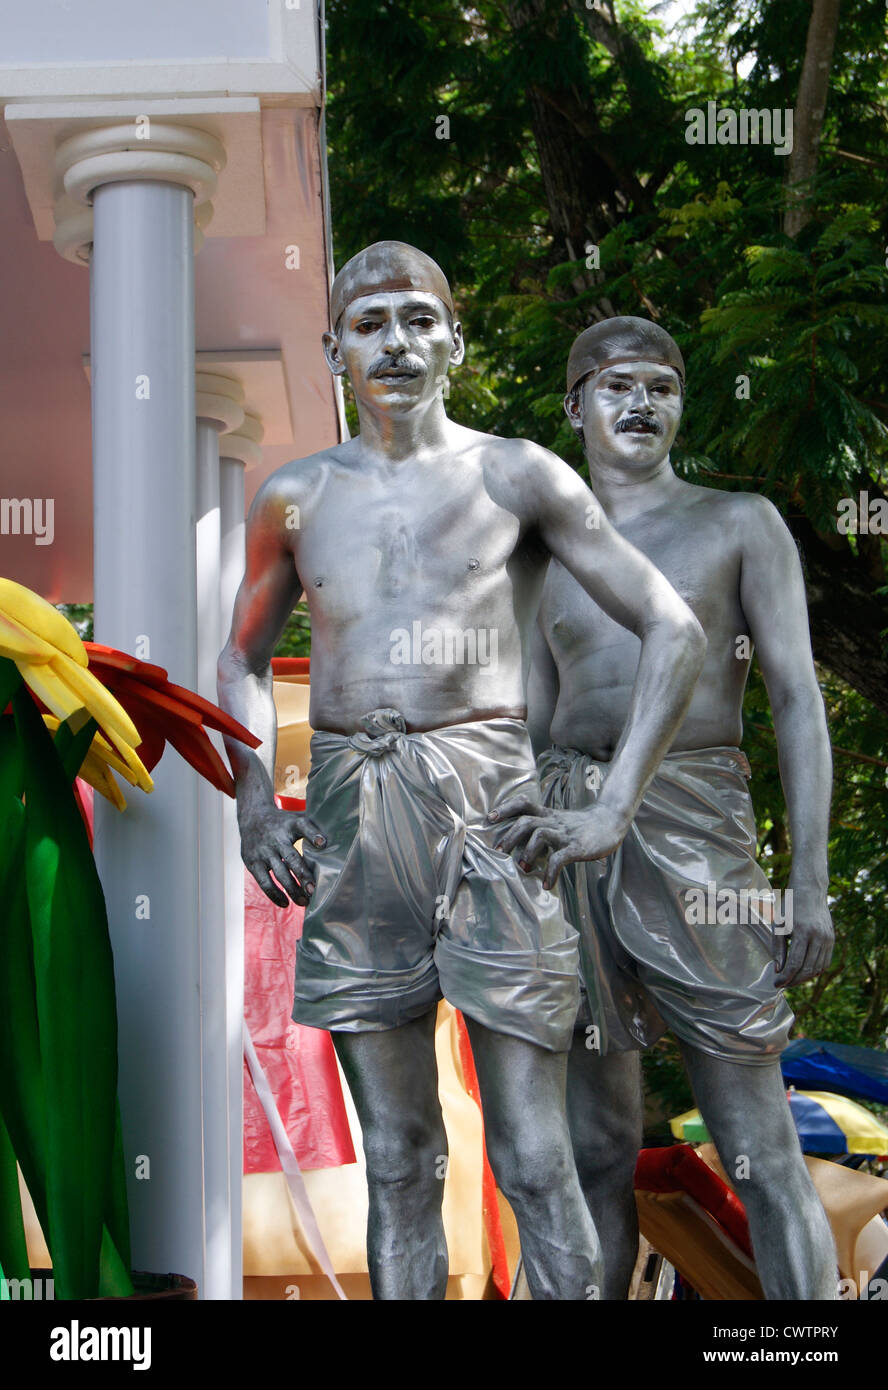 Silver man Standing Still Theme Presented on Onam celebrations in Kerala at India.Silver Painted Men Stand Still Like Statues Stock Photo